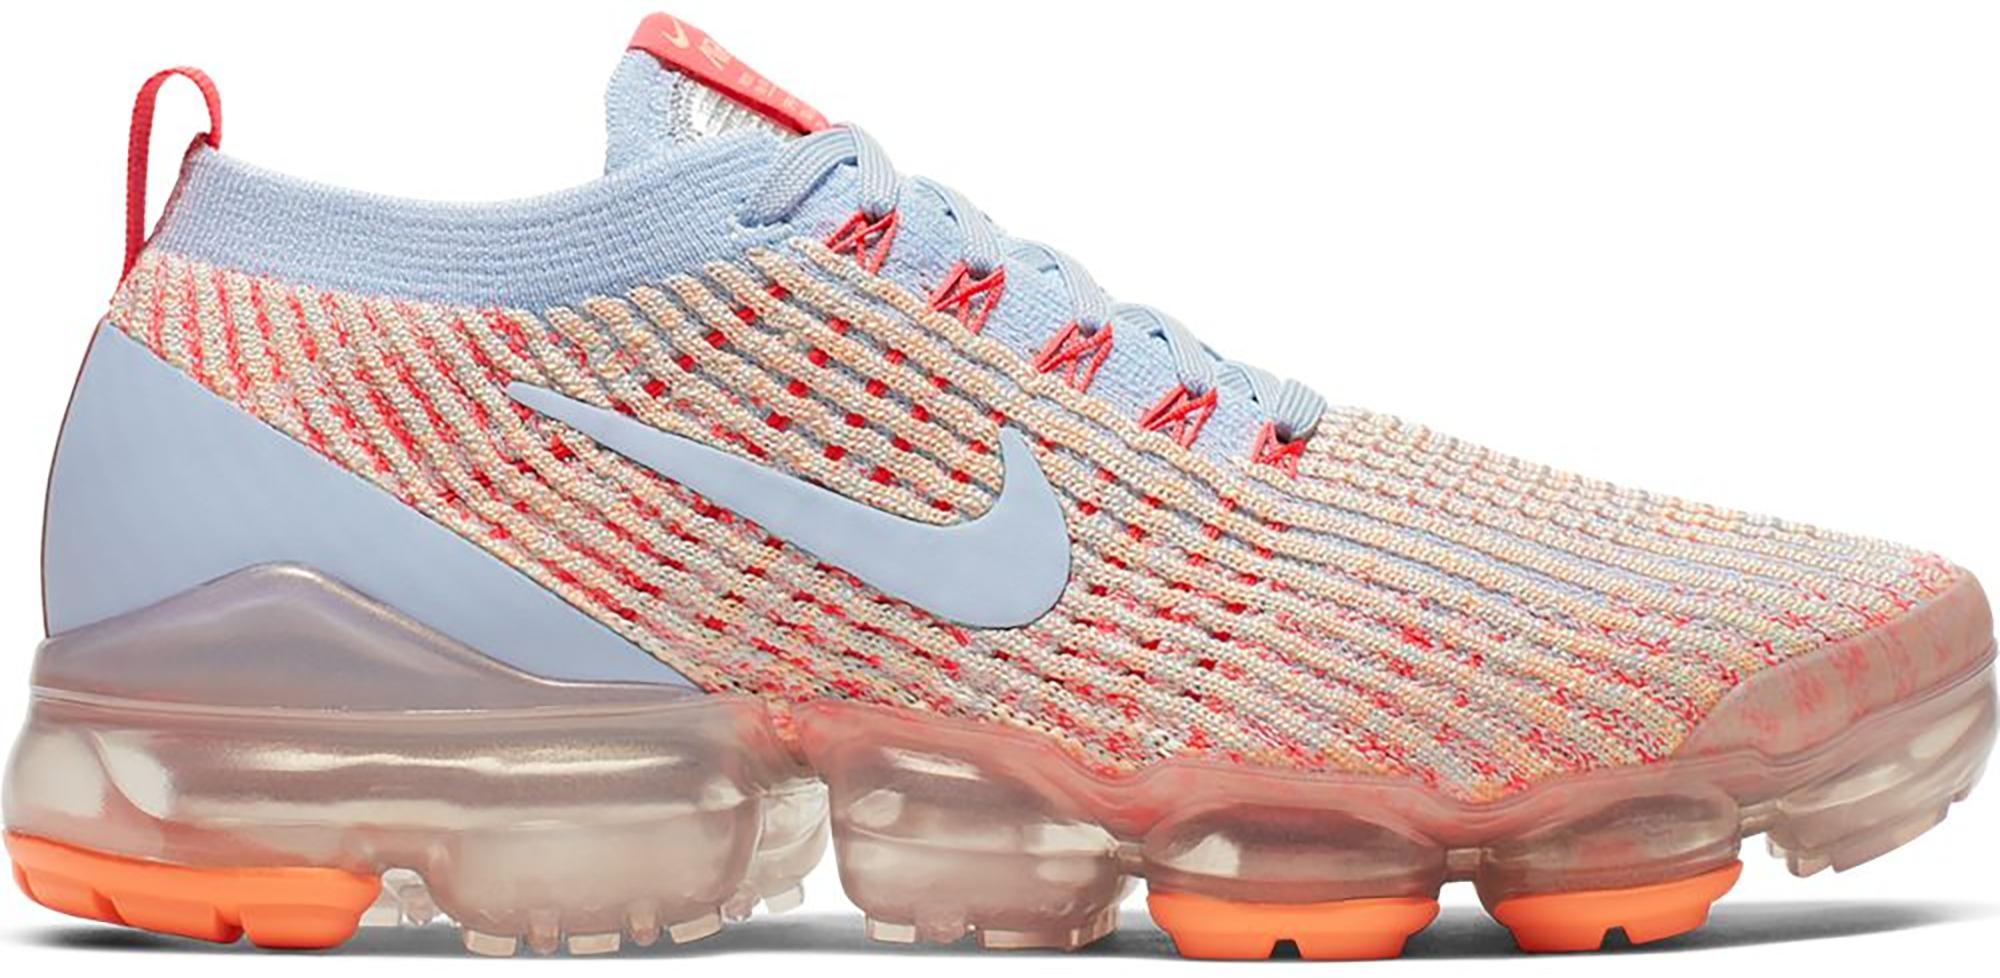 blue and orange vapormax flyknit